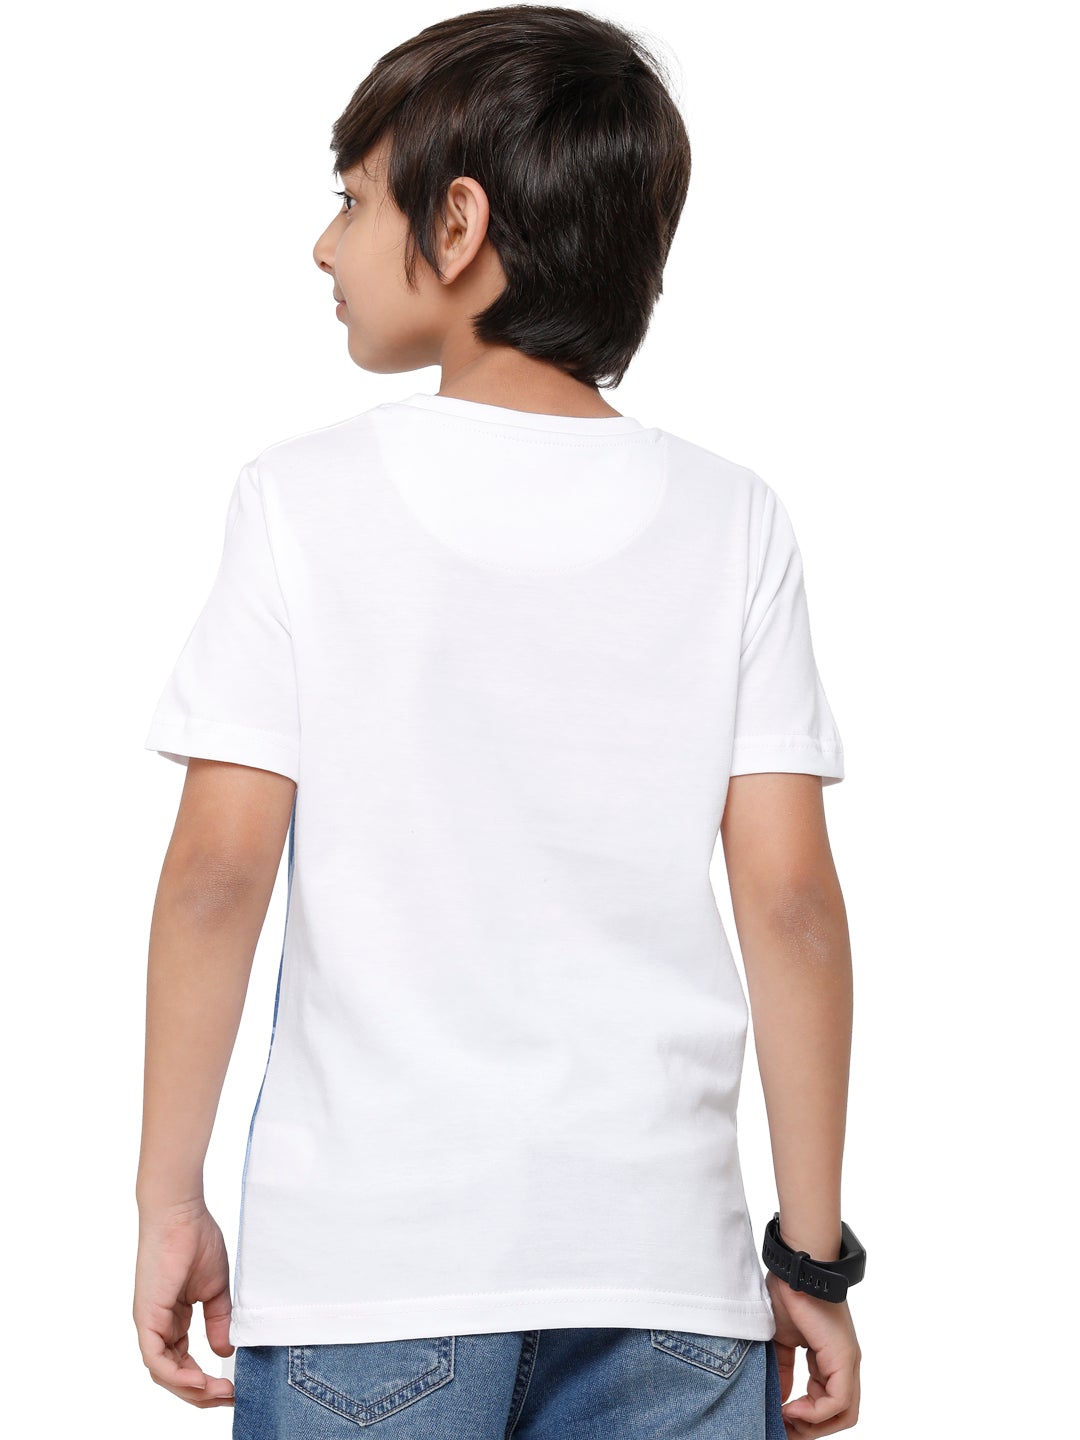 CP Boys White Printed Slim Fit Round Neck T-Shirt T-shirt Classic Polo 